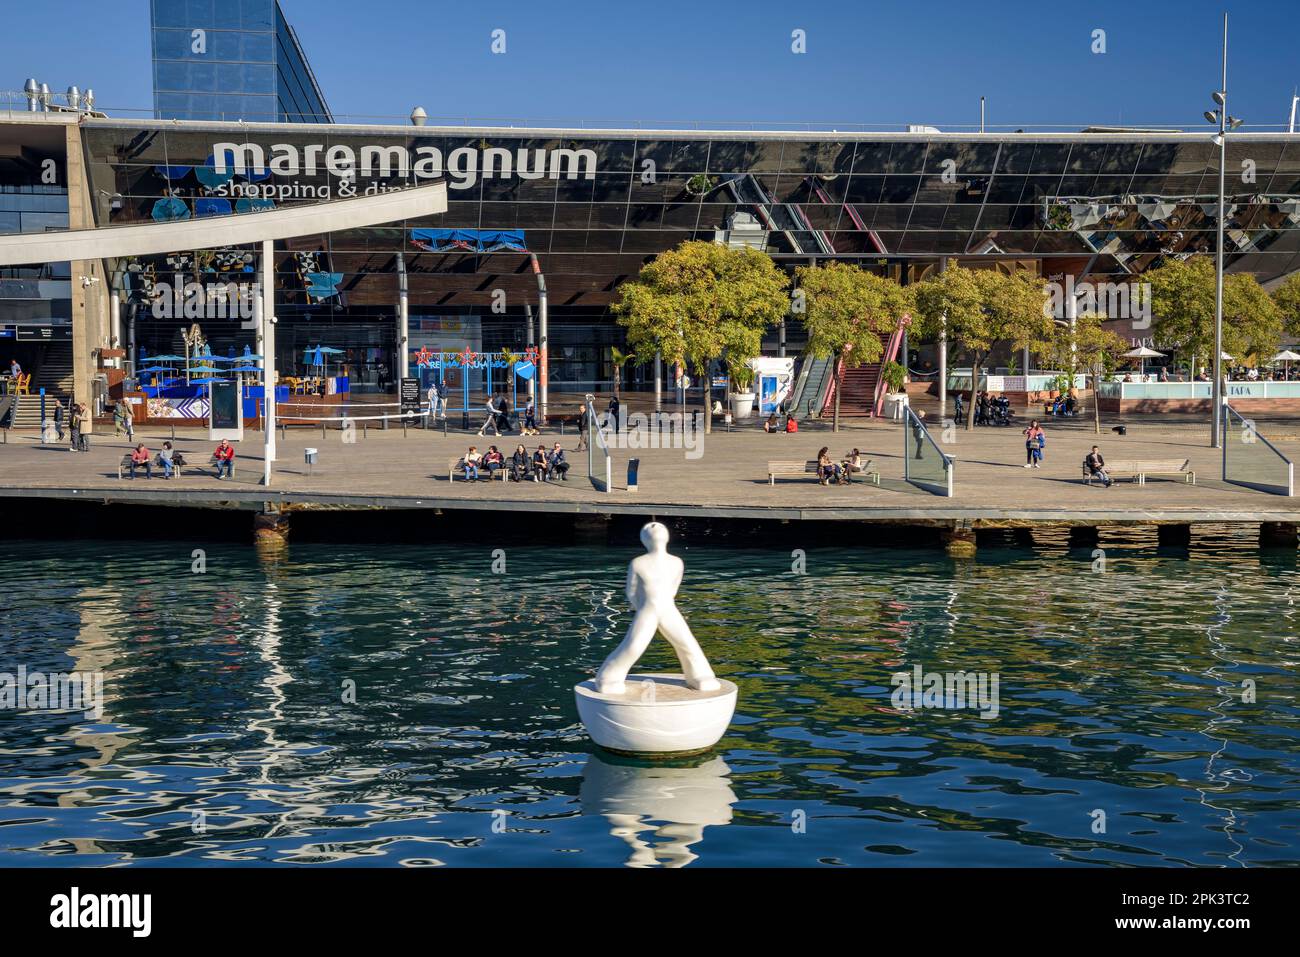 The Maremagnum shopping center in the Port Vell (old port) of Barcelona, seen from a Las Golondrinas ship (Barcelona, Catalonia, Spain) Stock Photo